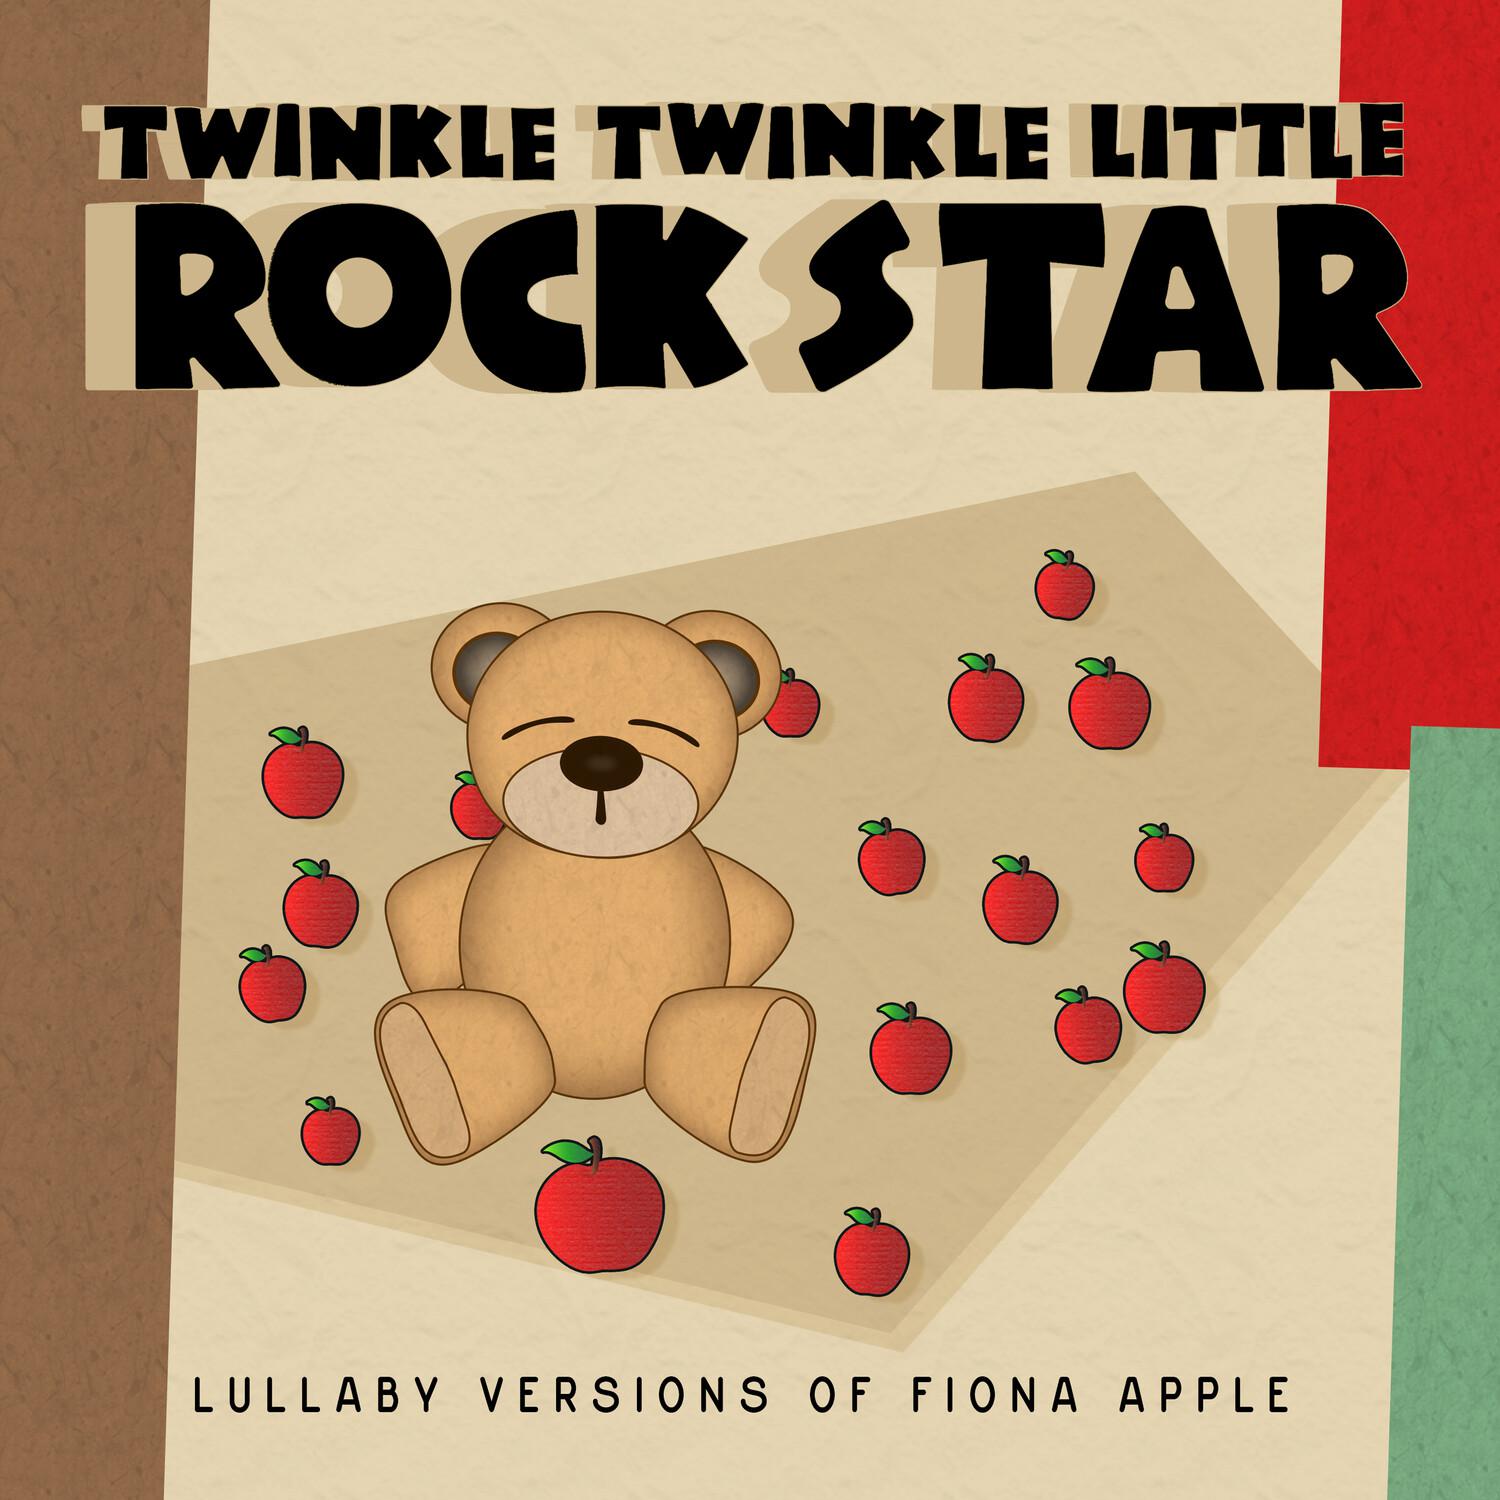 Lullaby Versions of Fiona Apple